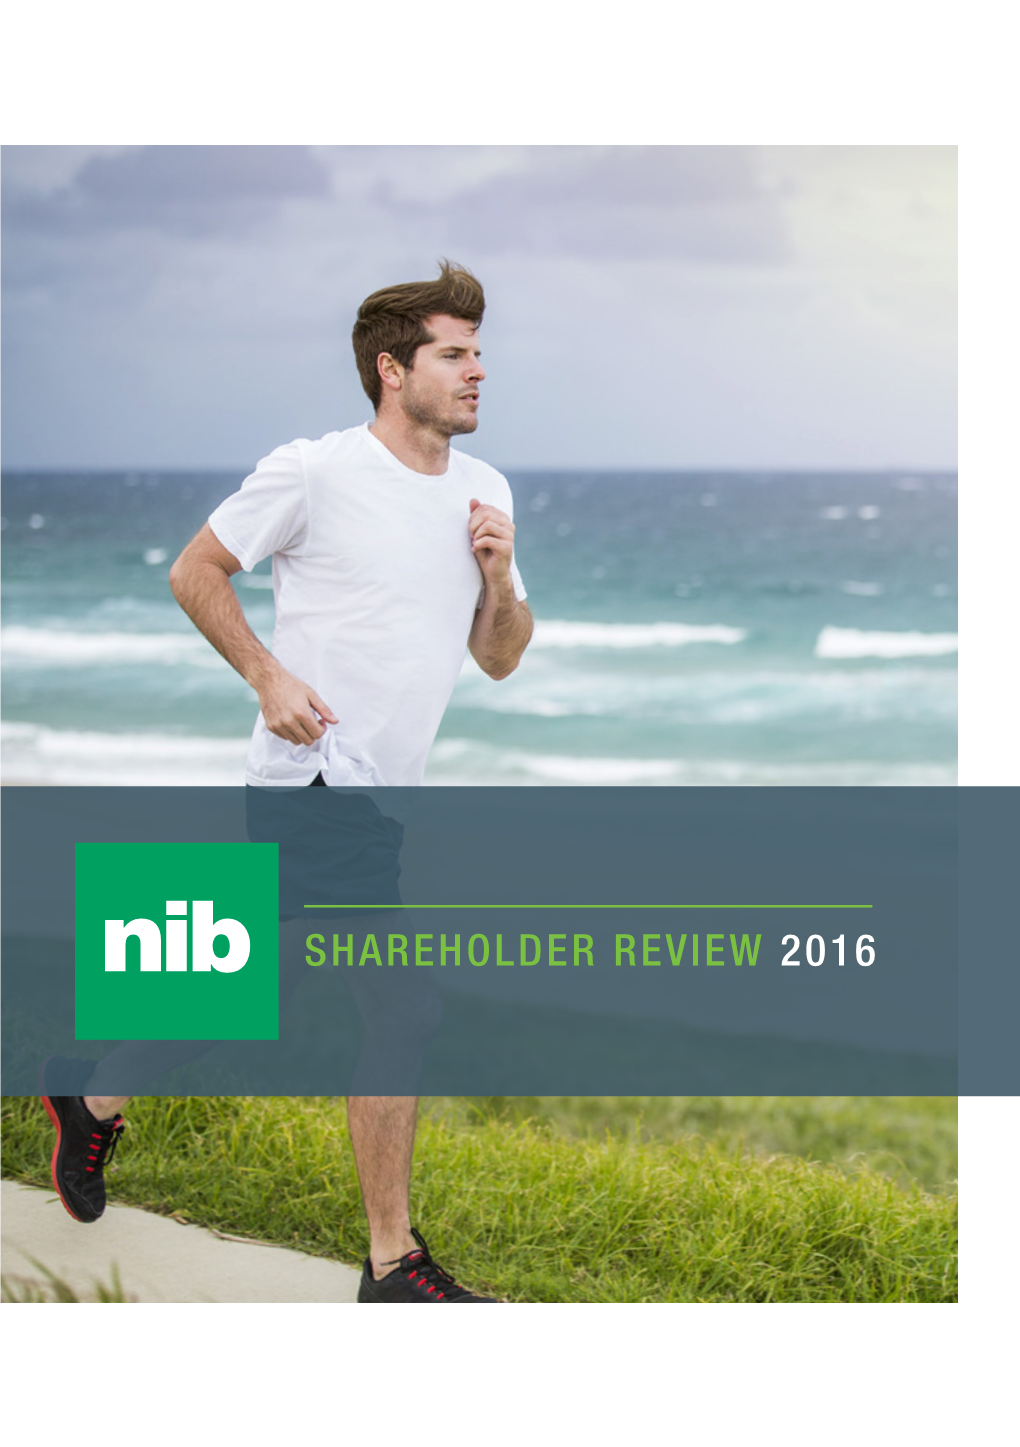 Shareholder Review 2016 Contents